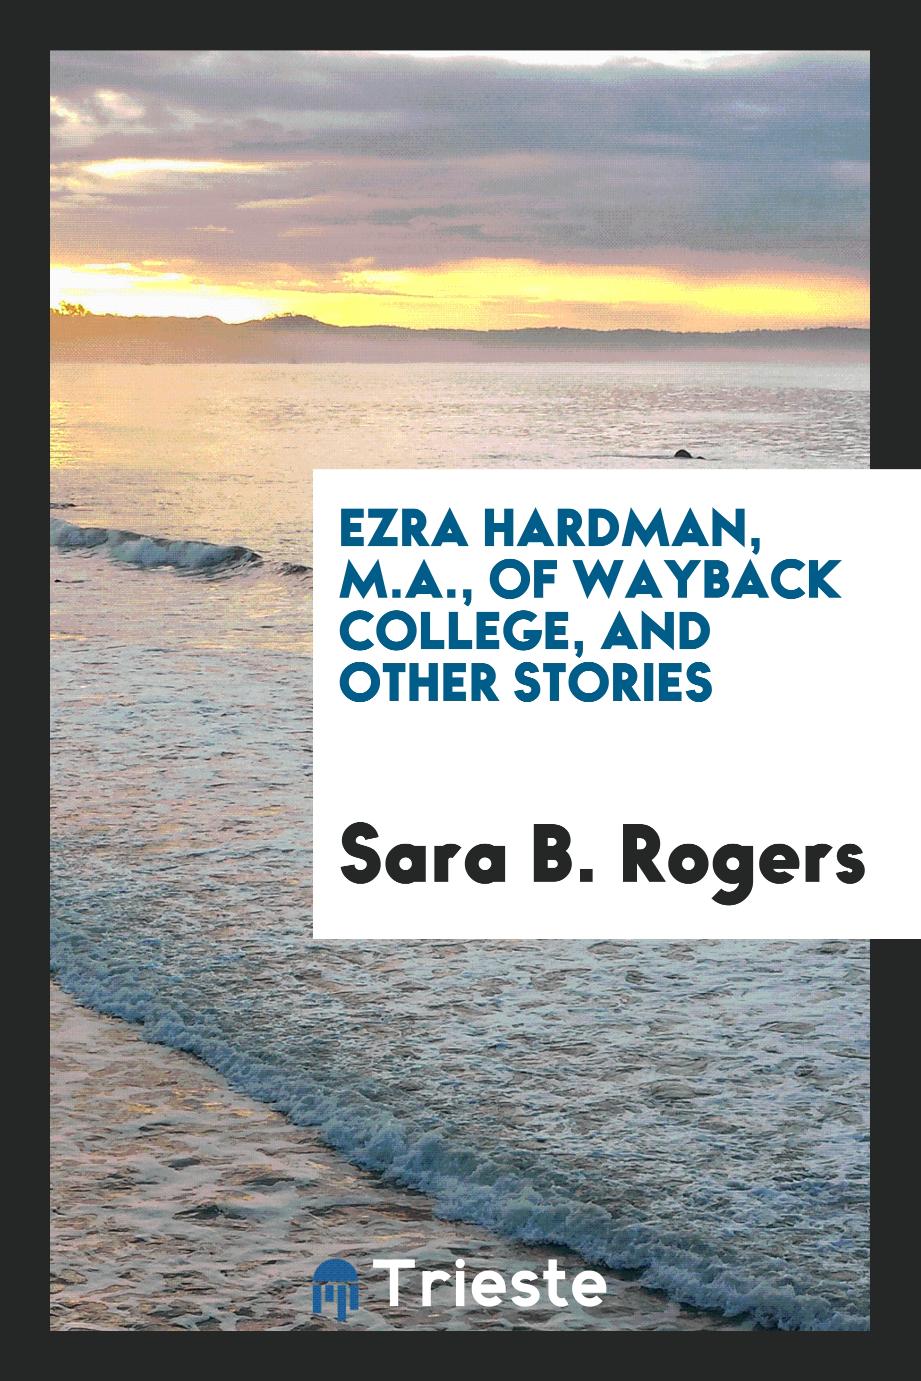 Ezra Hardman, M.A., of Wayback College, and other stories